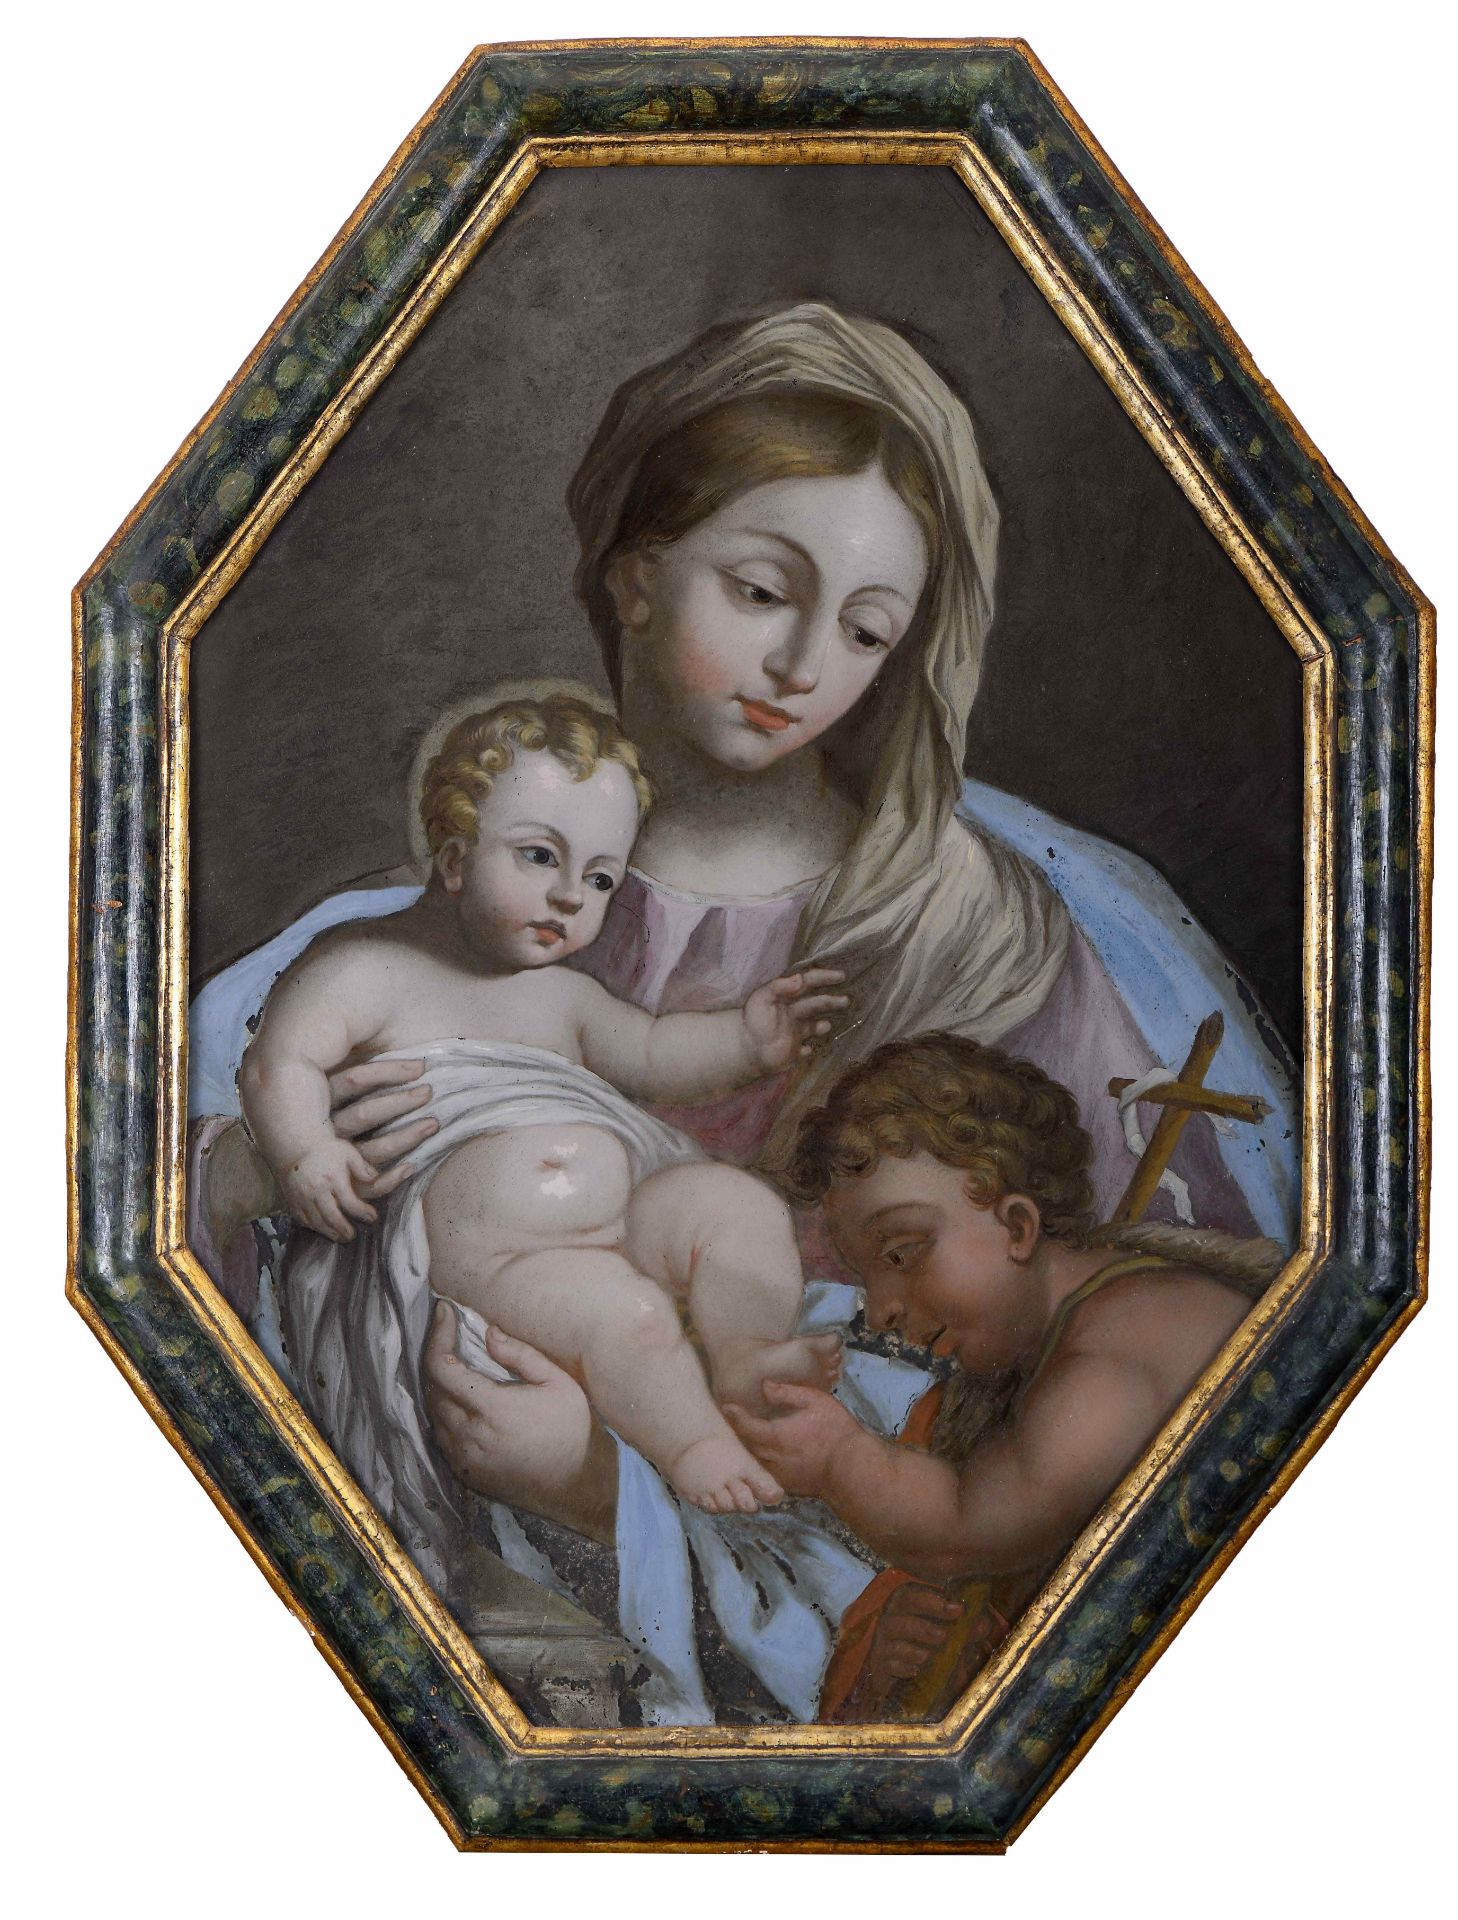 Our Lady with the Child Jesus and Saint John the Baptist